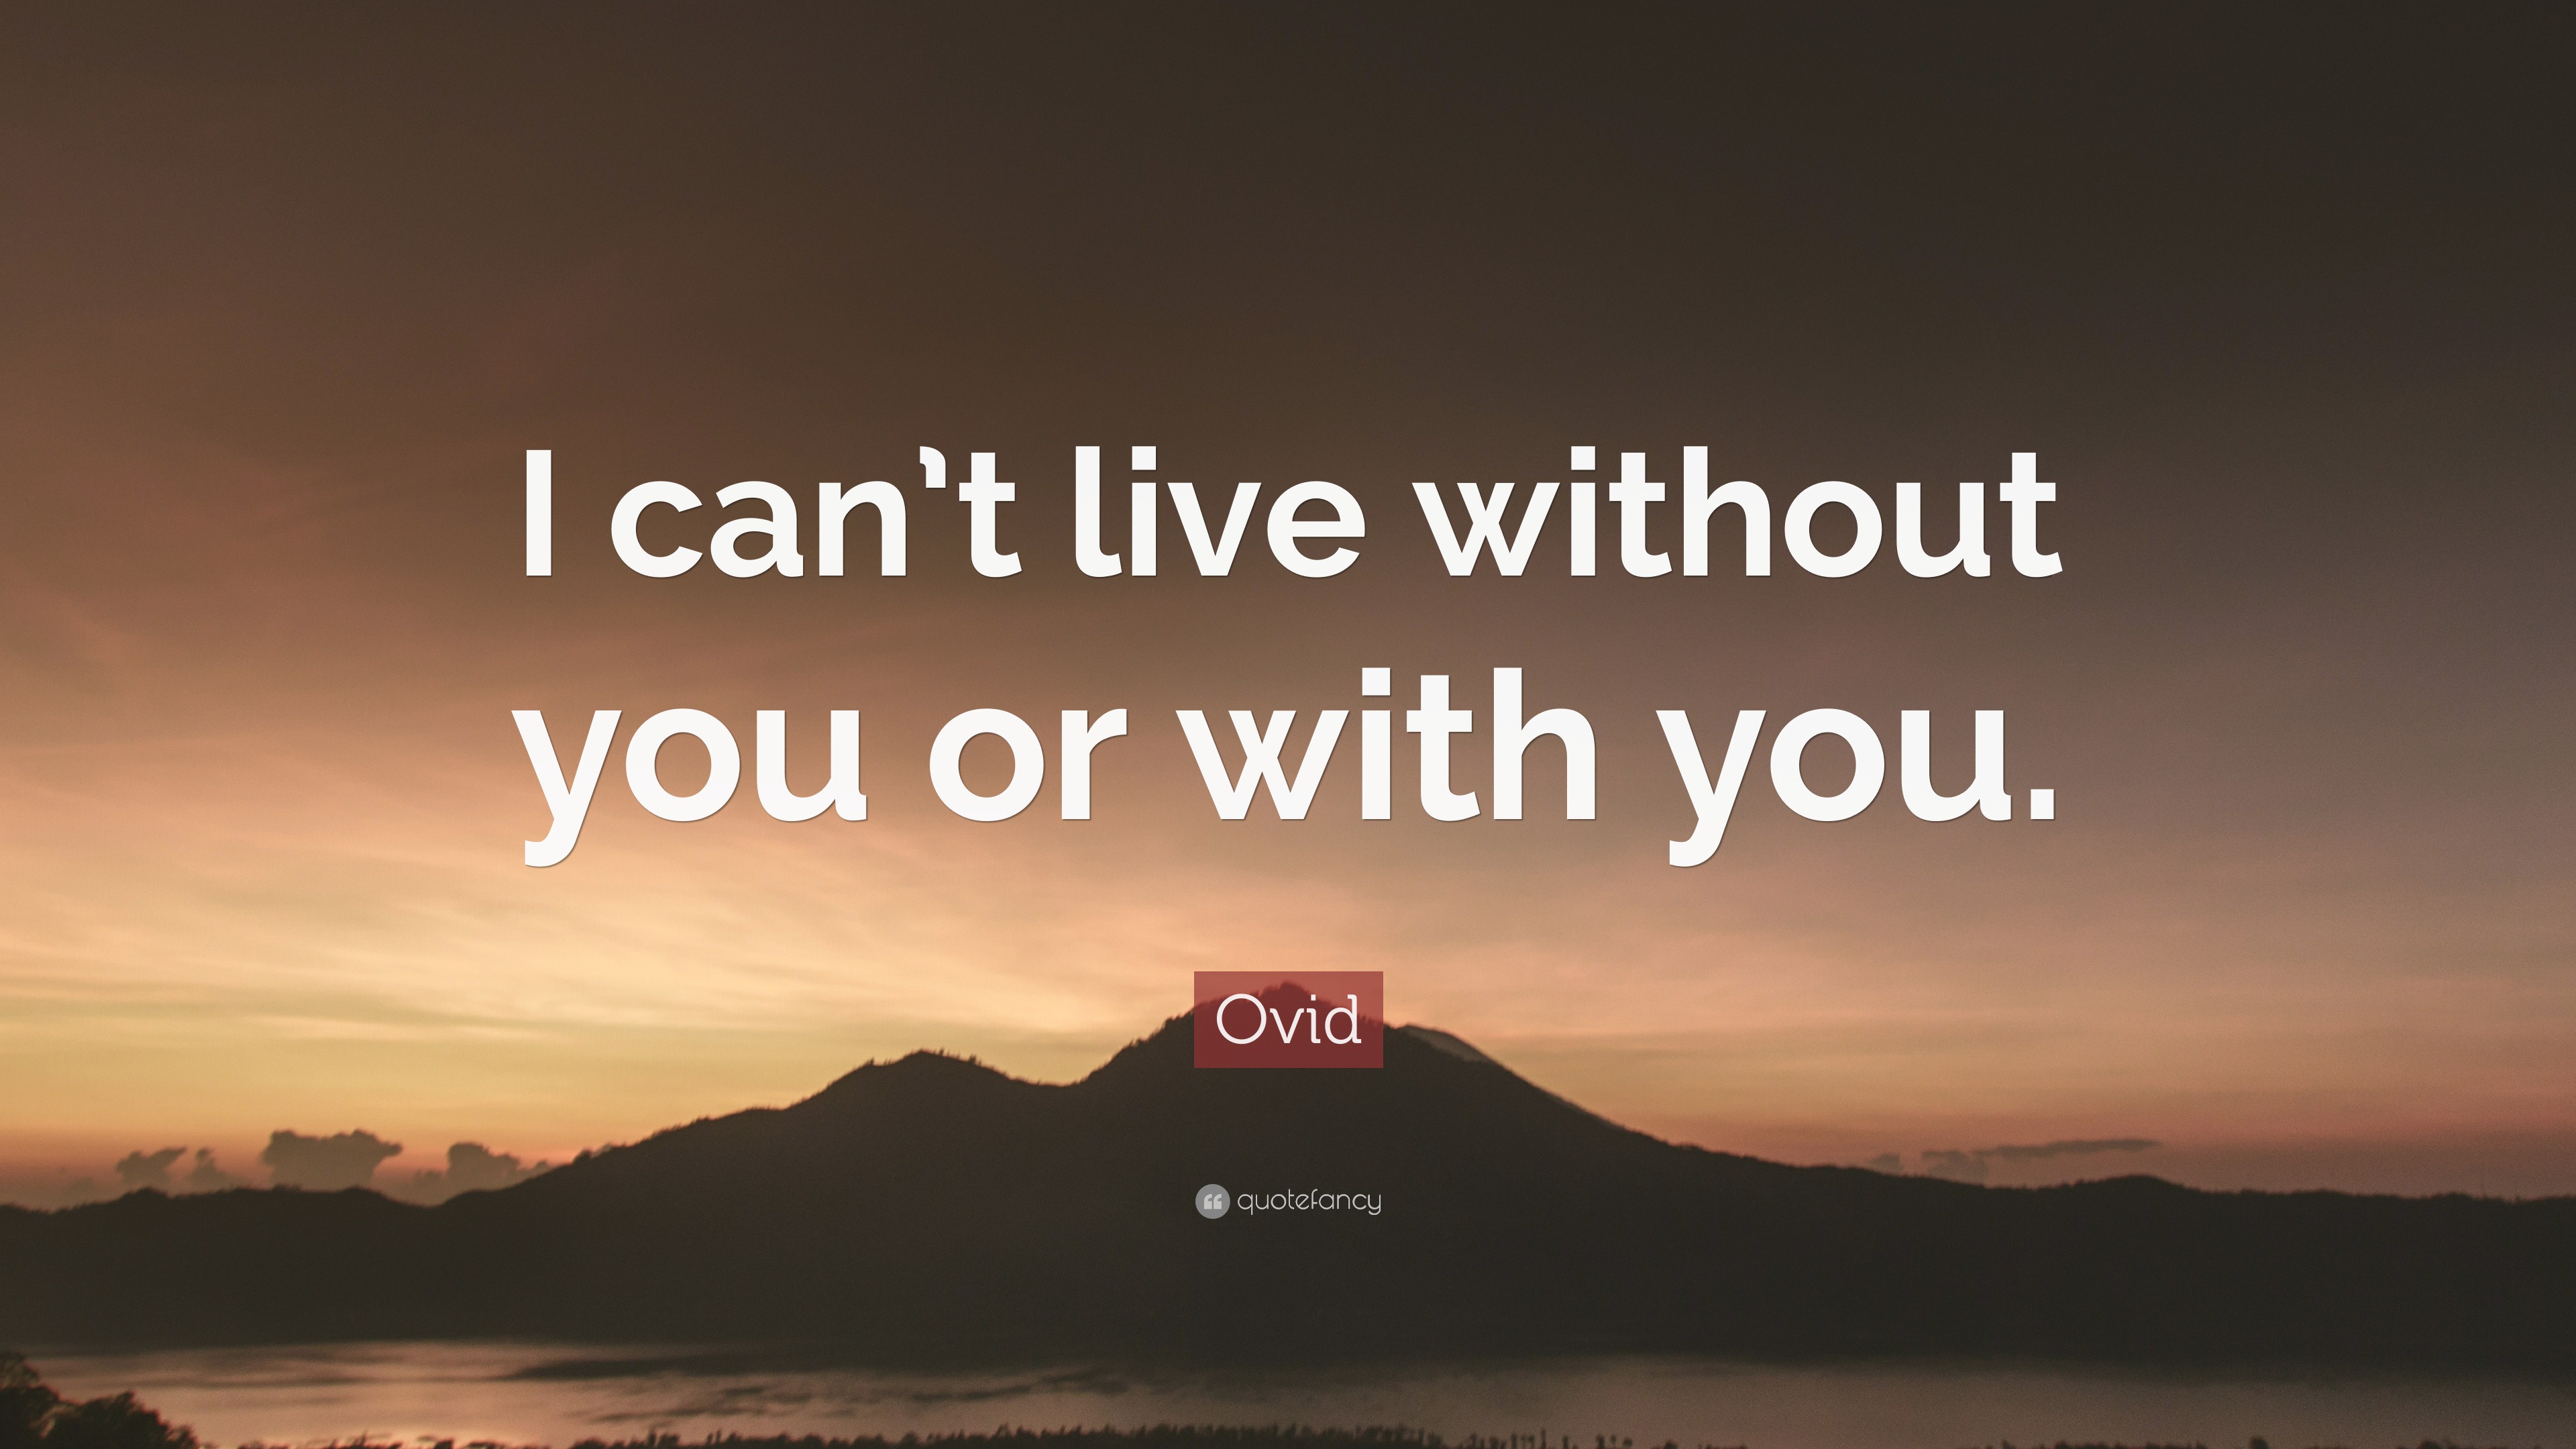 Ovid Quote: “I can’t live without you or with you.” (12 ...